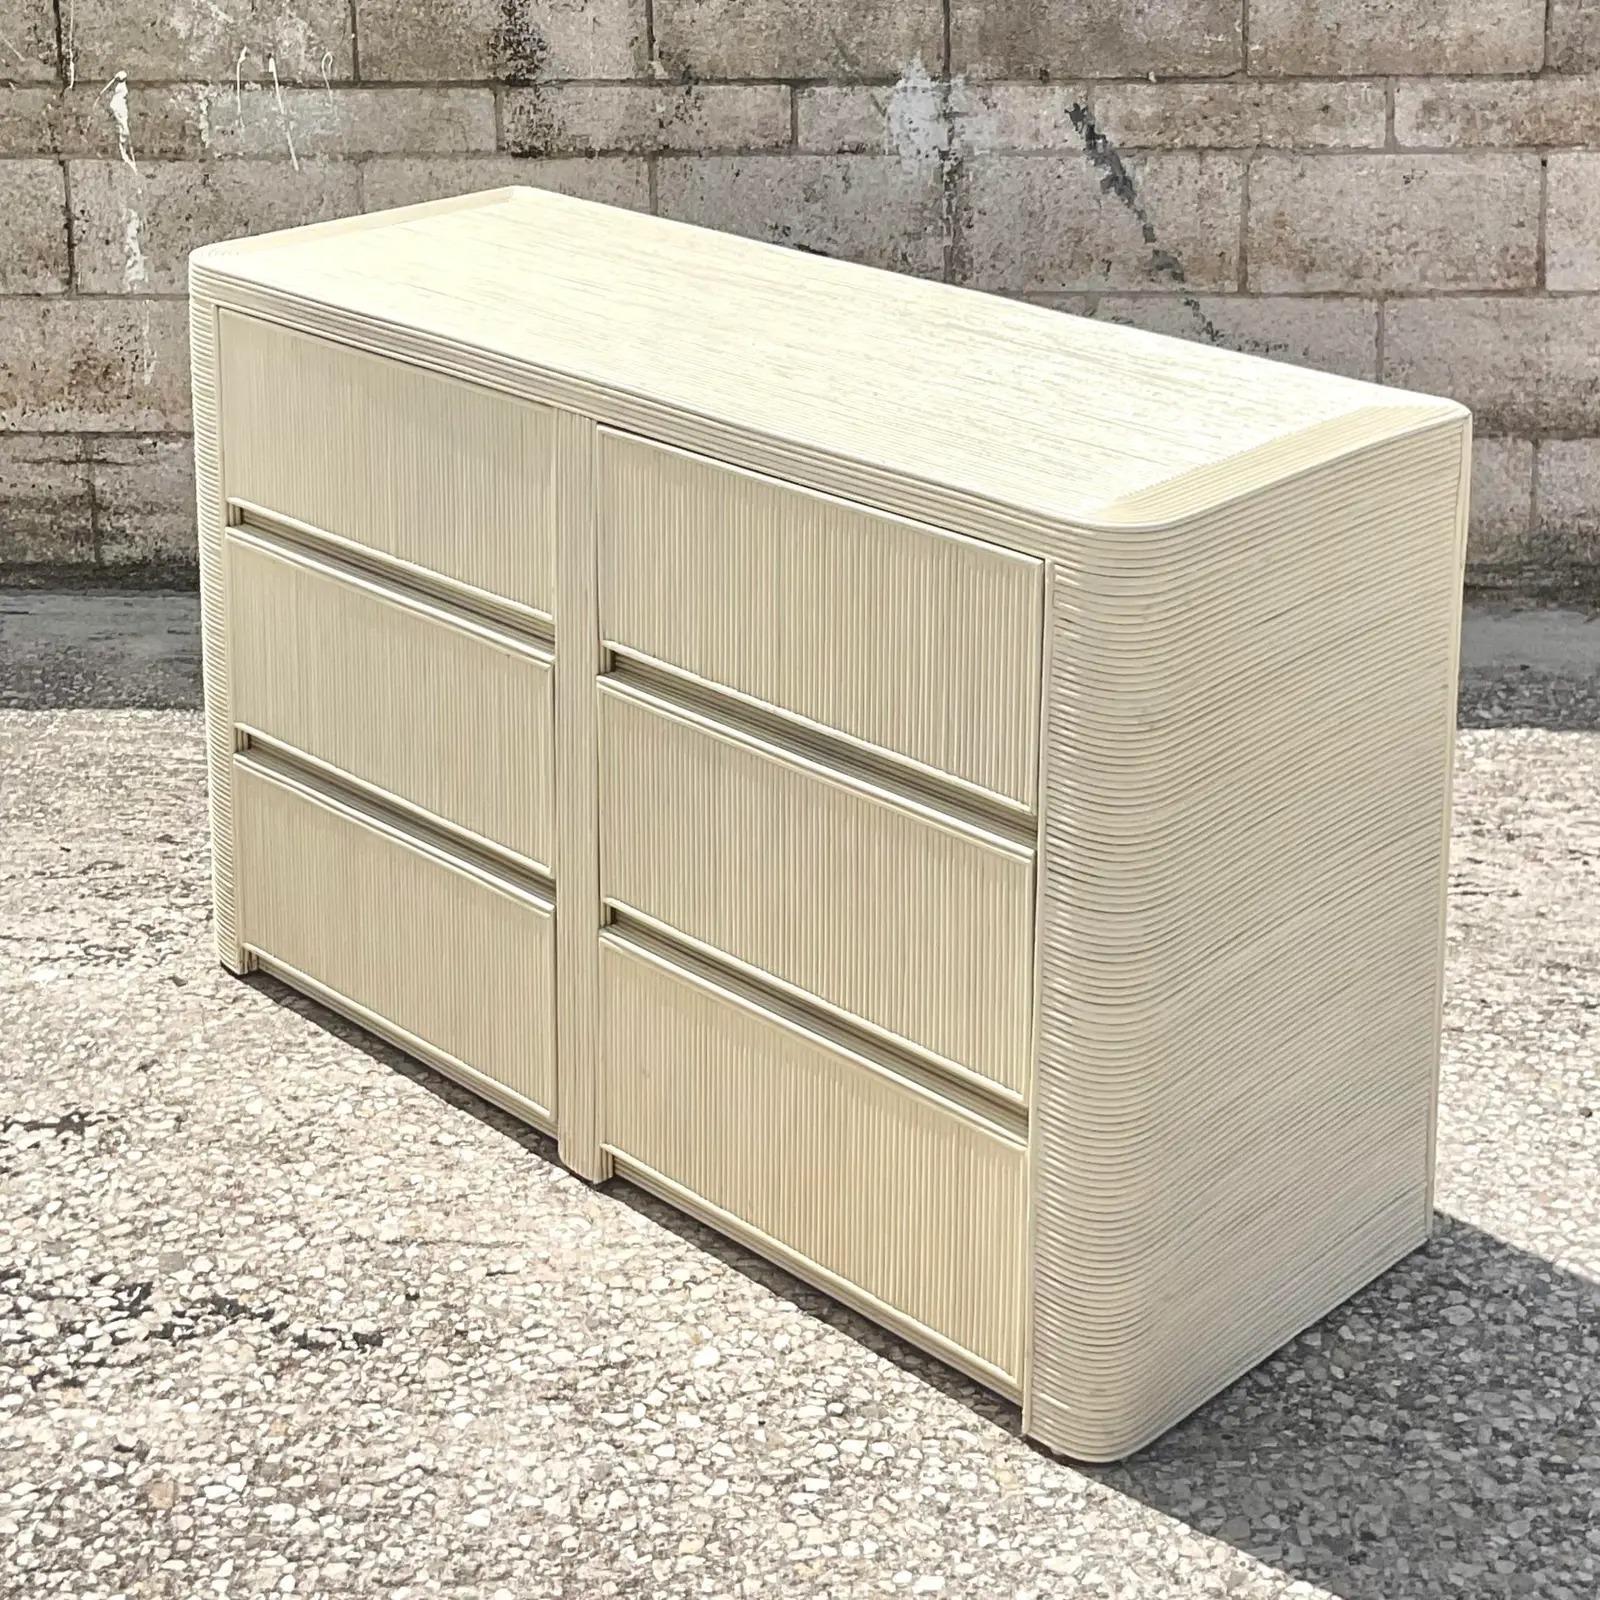 Fantastic vintage pencil reed dresser. Gorgeous painted finish in a chic neutral color. Six deep drawers with a rounded edge. Acquired from a Palm Beach estate.